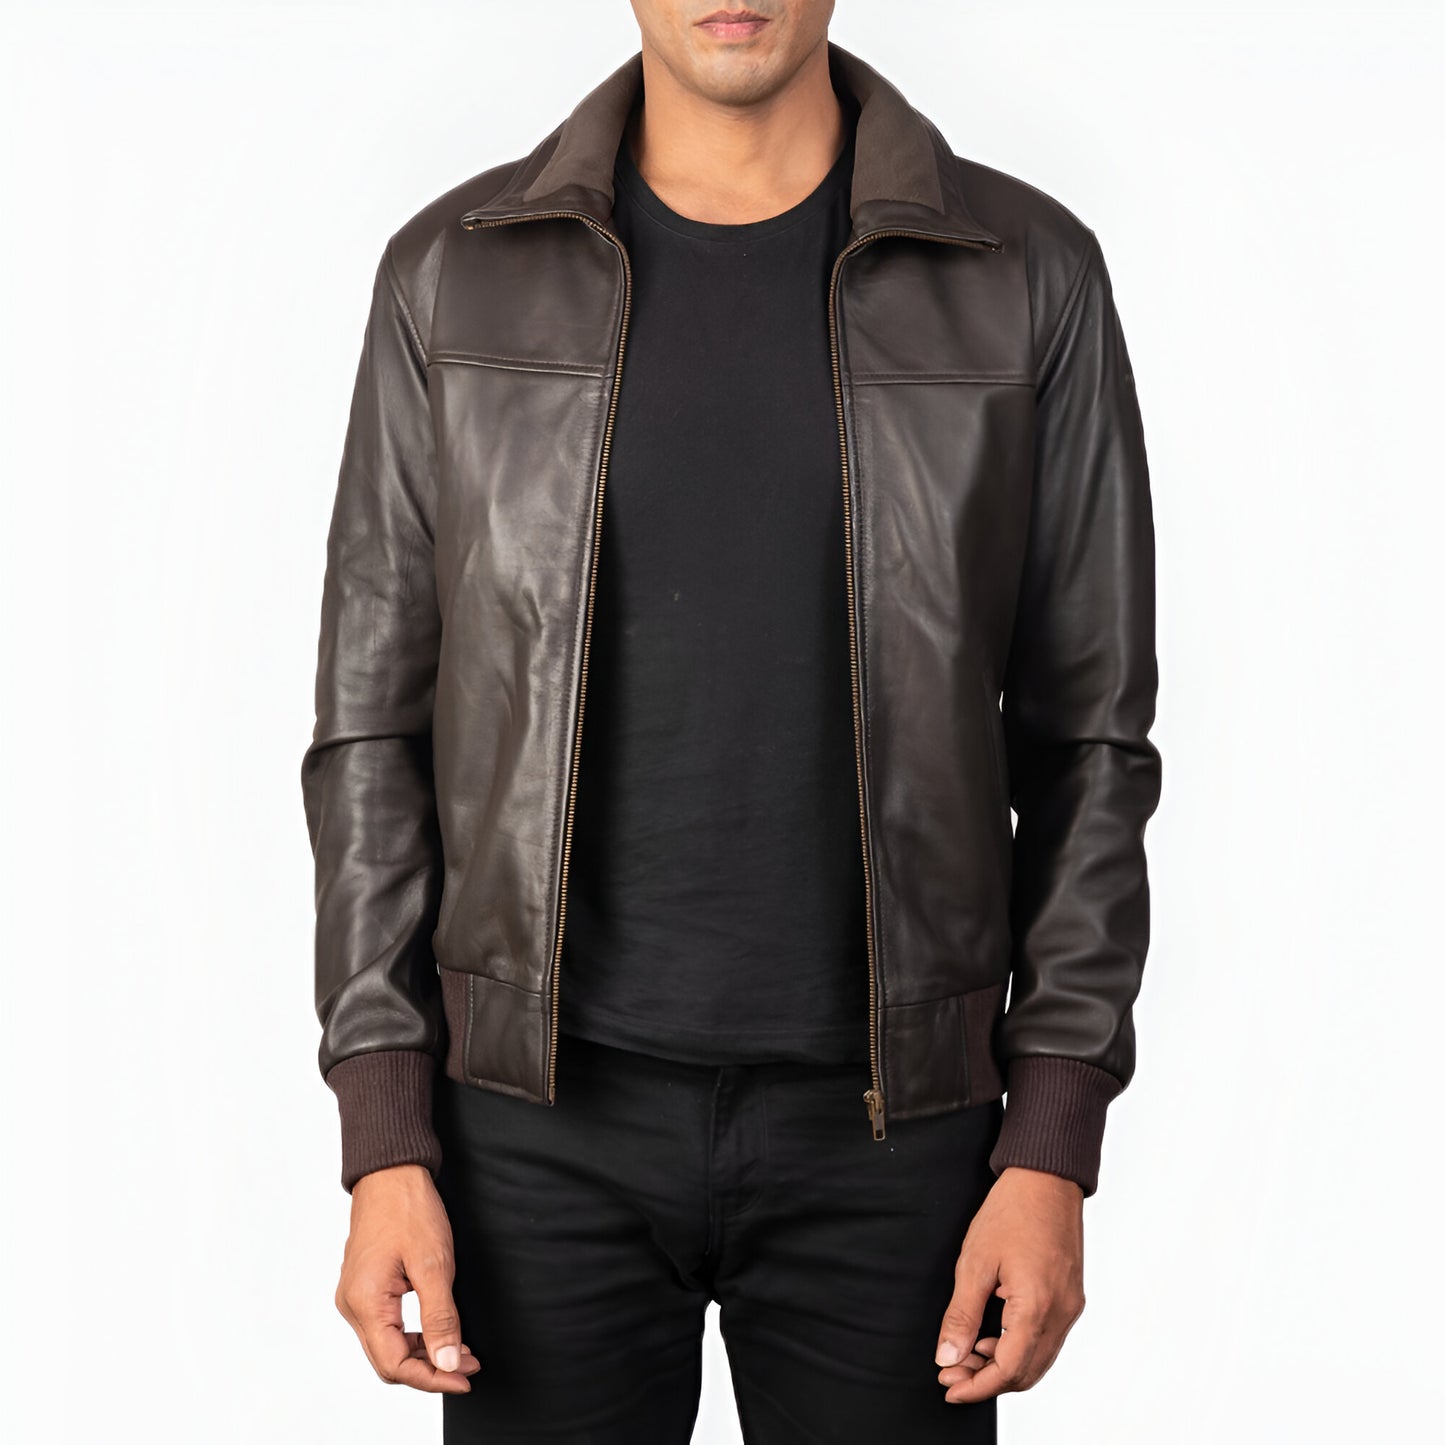 Dicks Leather Genuine Brown Leather Bomber Jacket